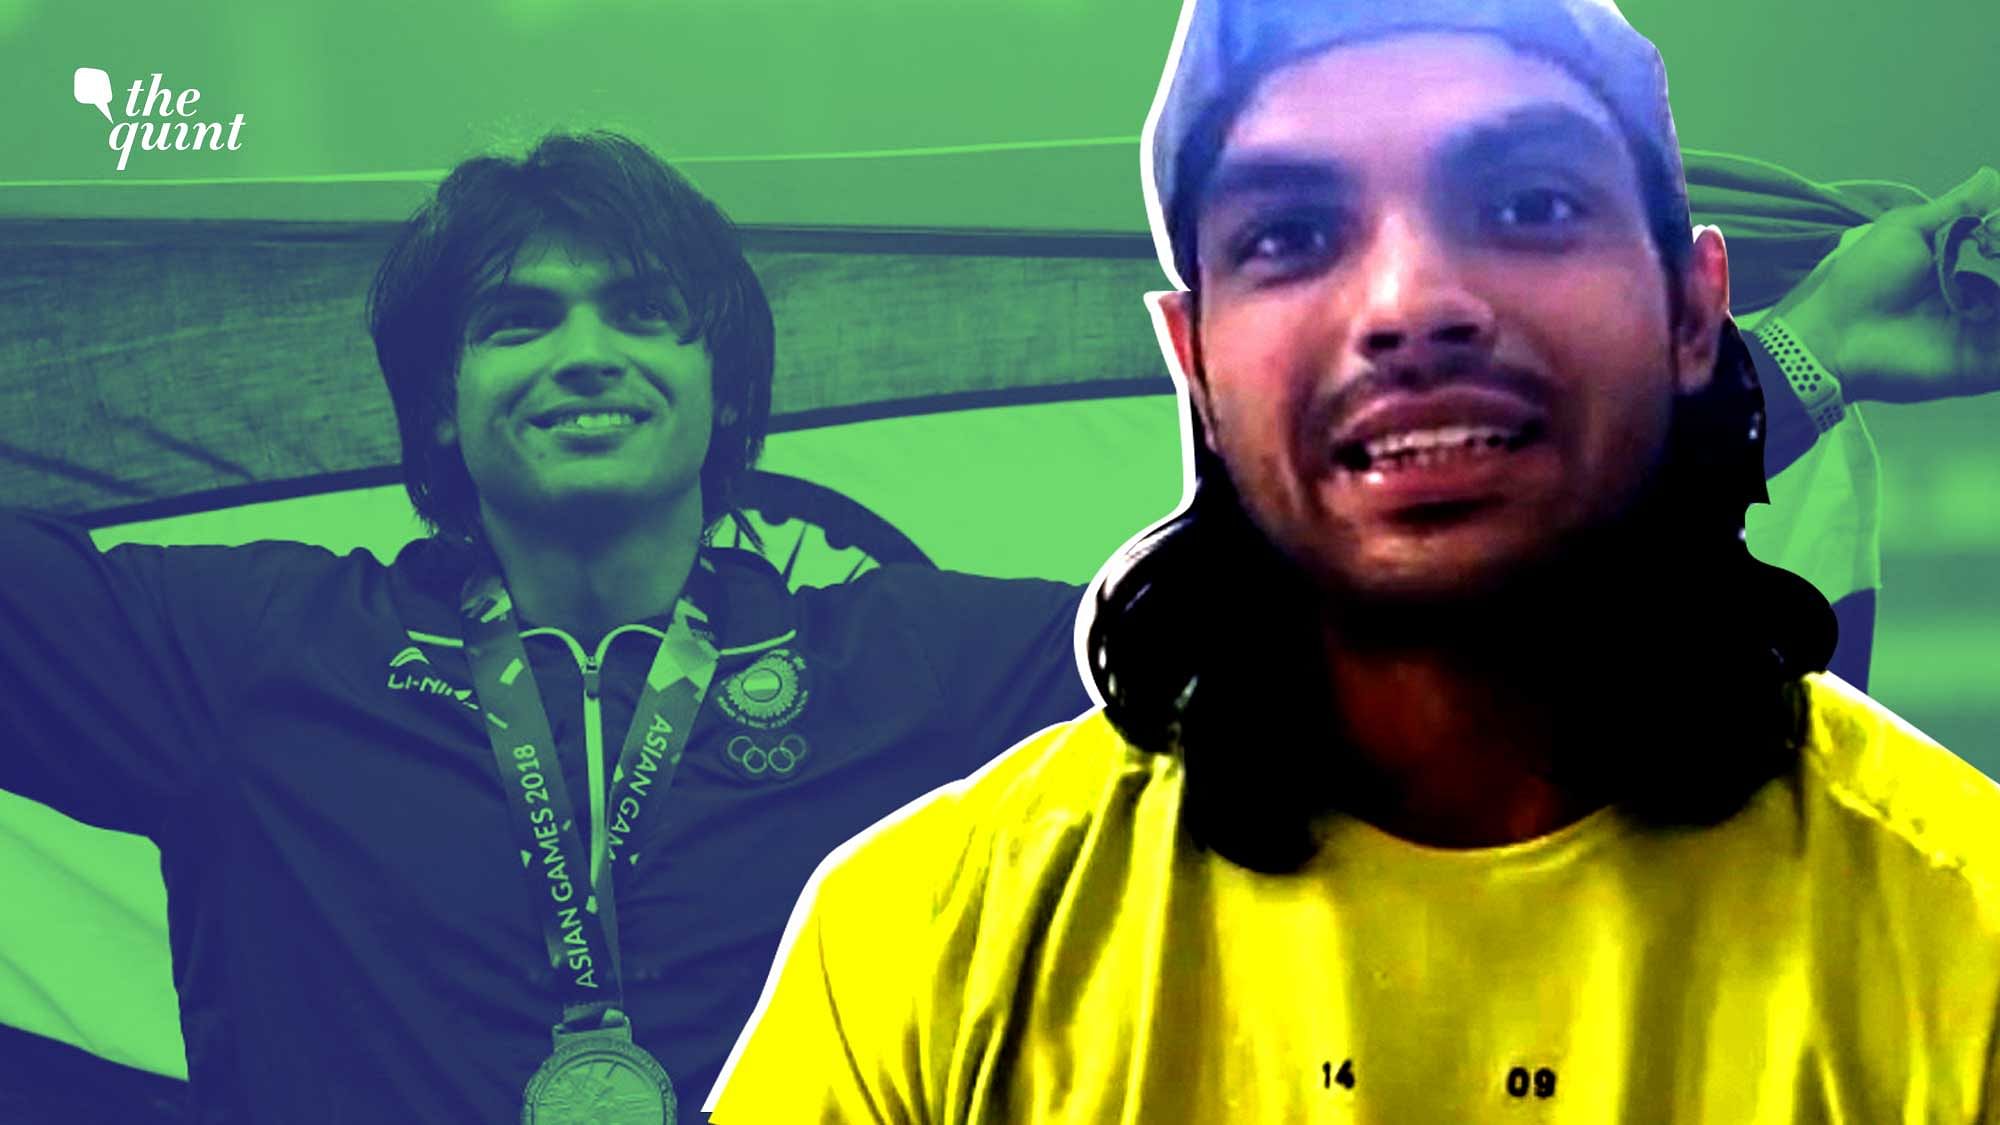 People expect me to win a gold but how will that happen if I can’t compete against the best before the Olympics, asks Neeraj Chopra.